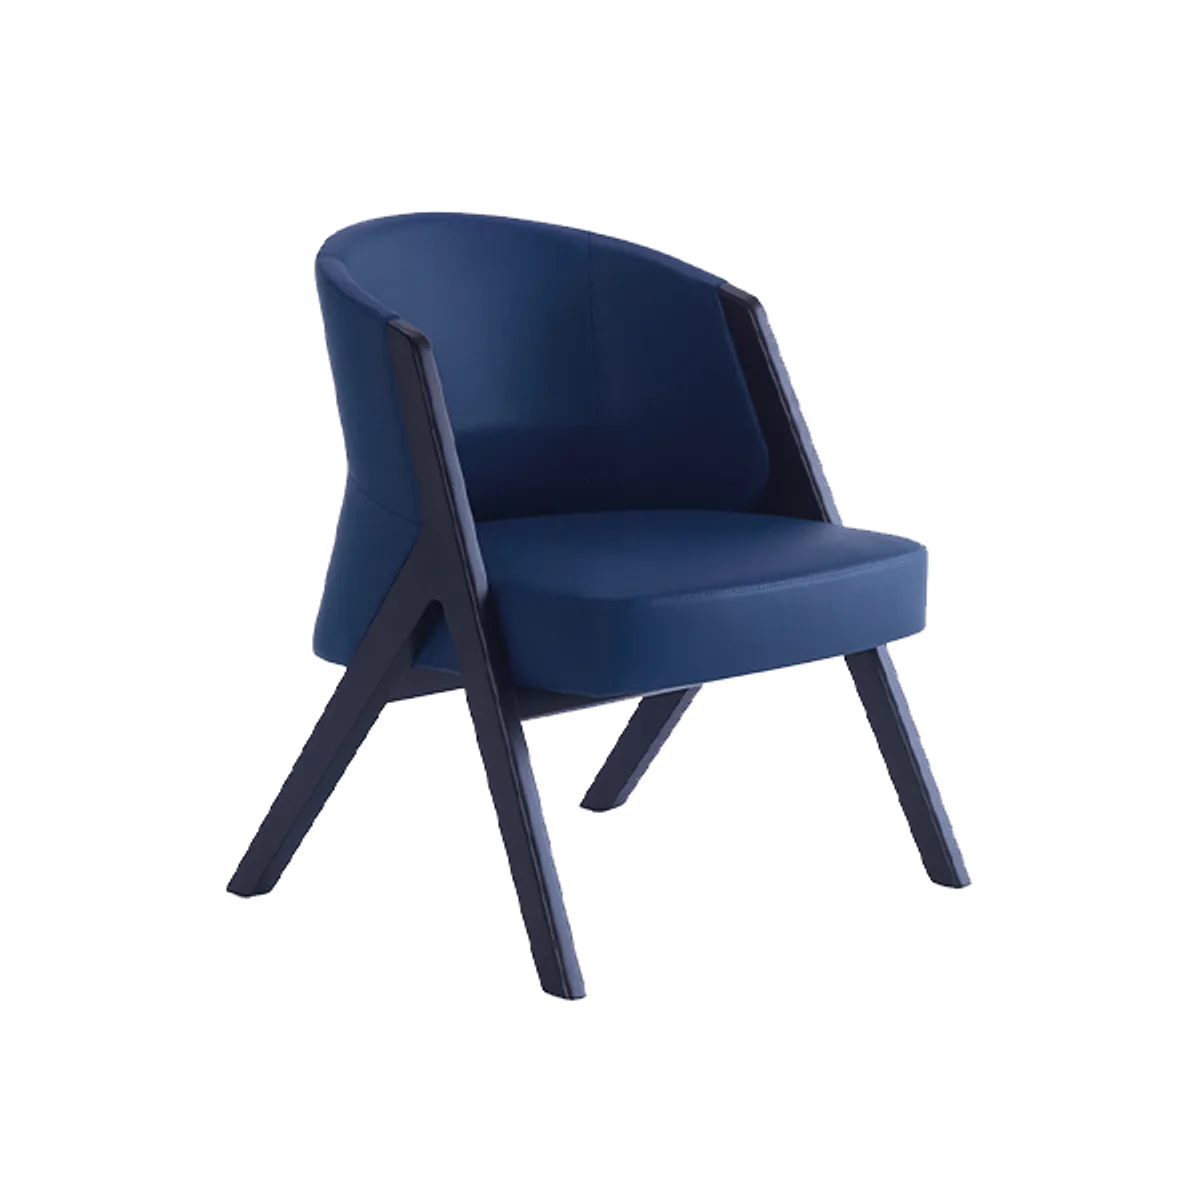 Web T Bone Lounge Chair Inside Out Contracts